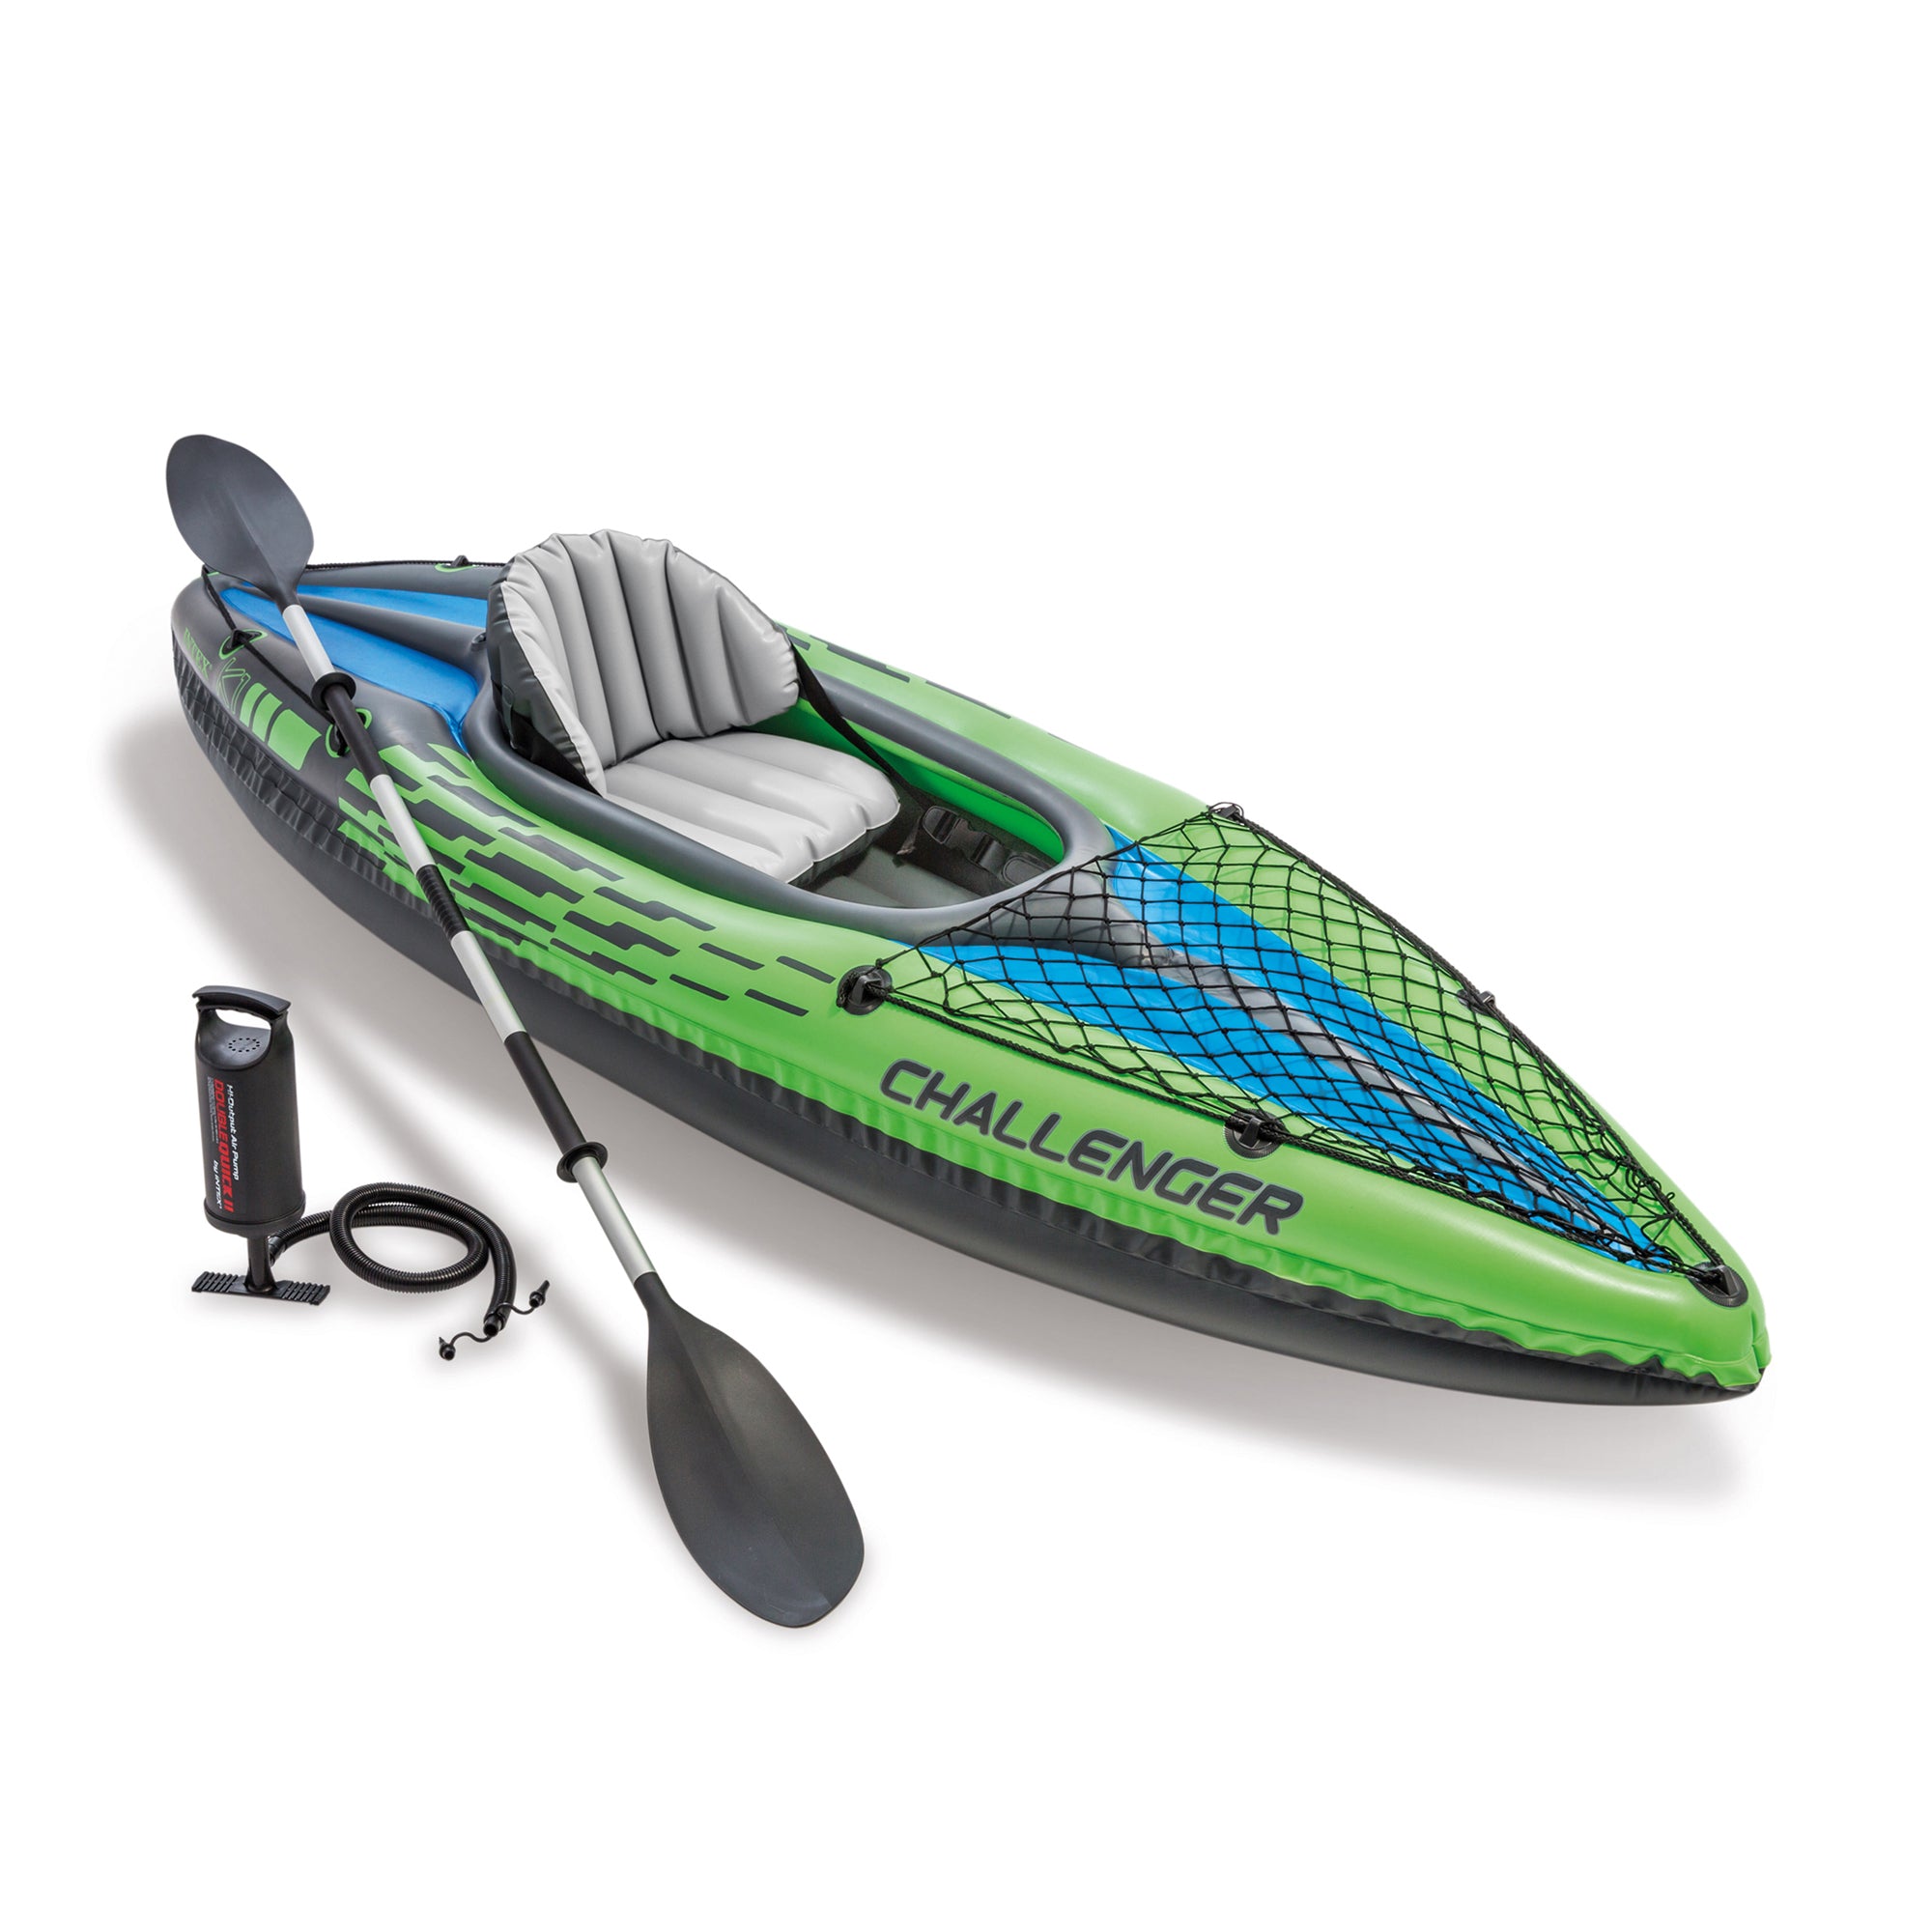 Intex Challenger K1 Inflatable Kayak with Oar and Hand Pump, Green/Blue